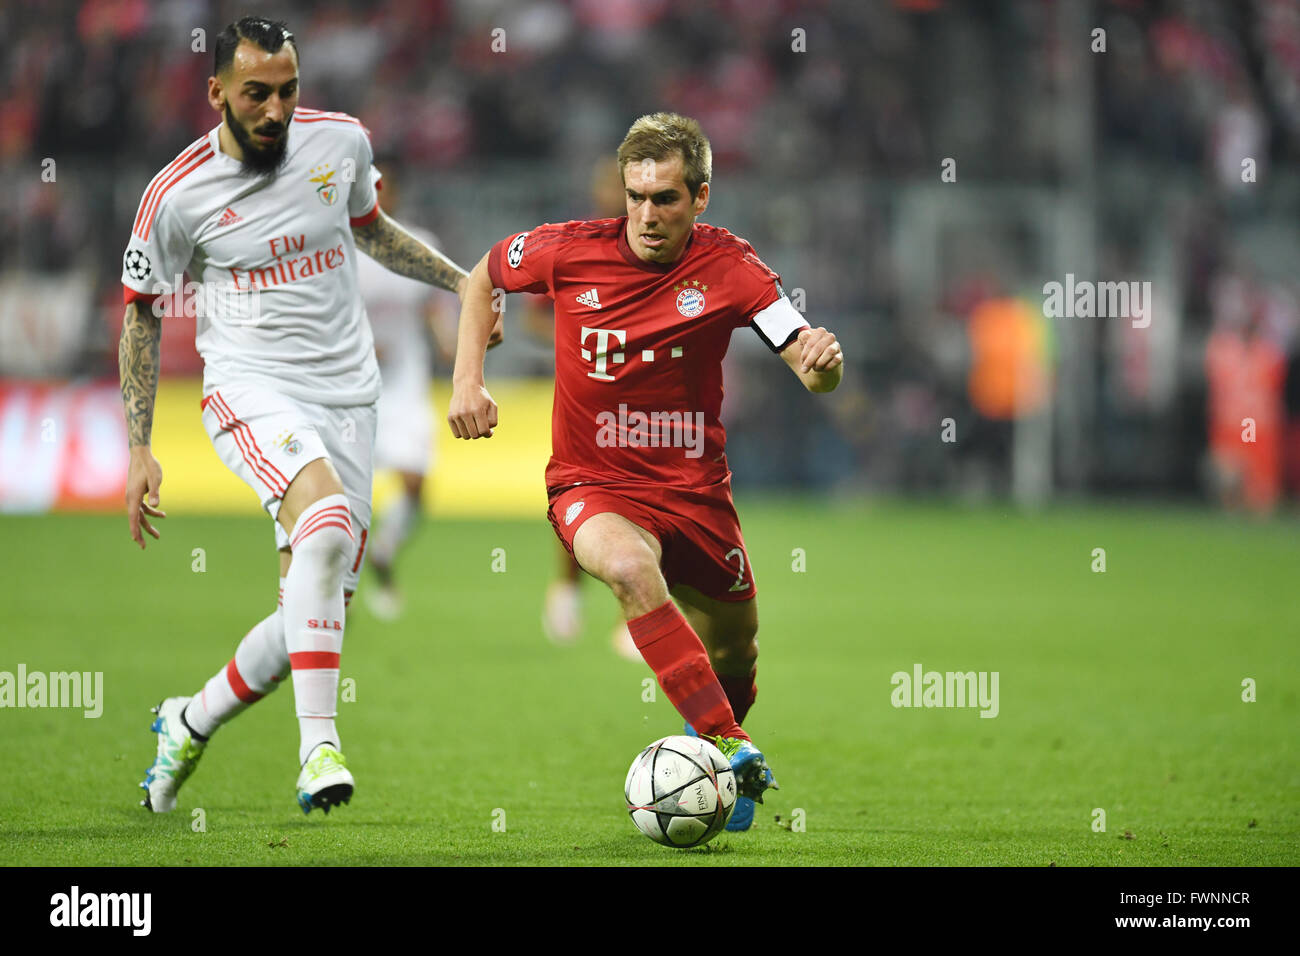 Munich, Germany. 5th Apr, 2016. Munich's Philipp Lahm (r) and Benfica's Kostas Mitroglou in action during the Champions League quarter finals first leg match between Bayern Munich and S.L. Benfica at Allianz Arena in Munich, Germany, 5 April 2016. PHOTO: ANDREAS GEBERT/dpa/Alamy Live News Stock Photo